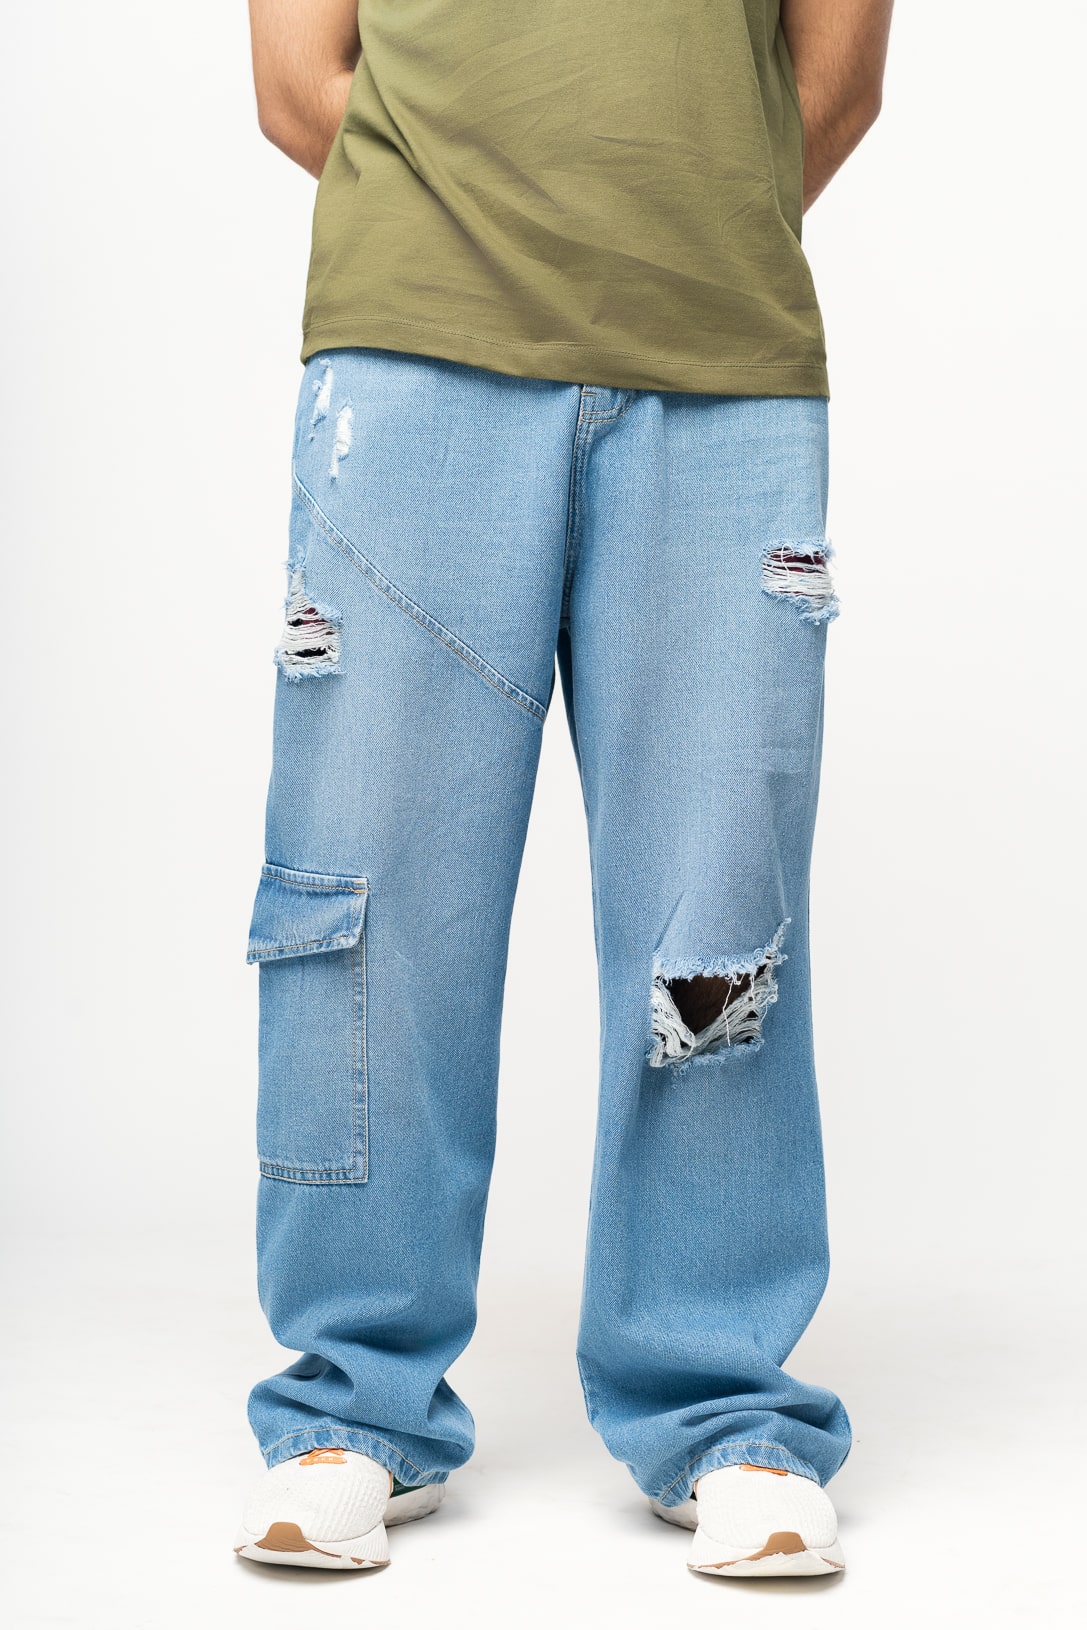 STRAIGHT DISTRESSED MEN'S JEANS